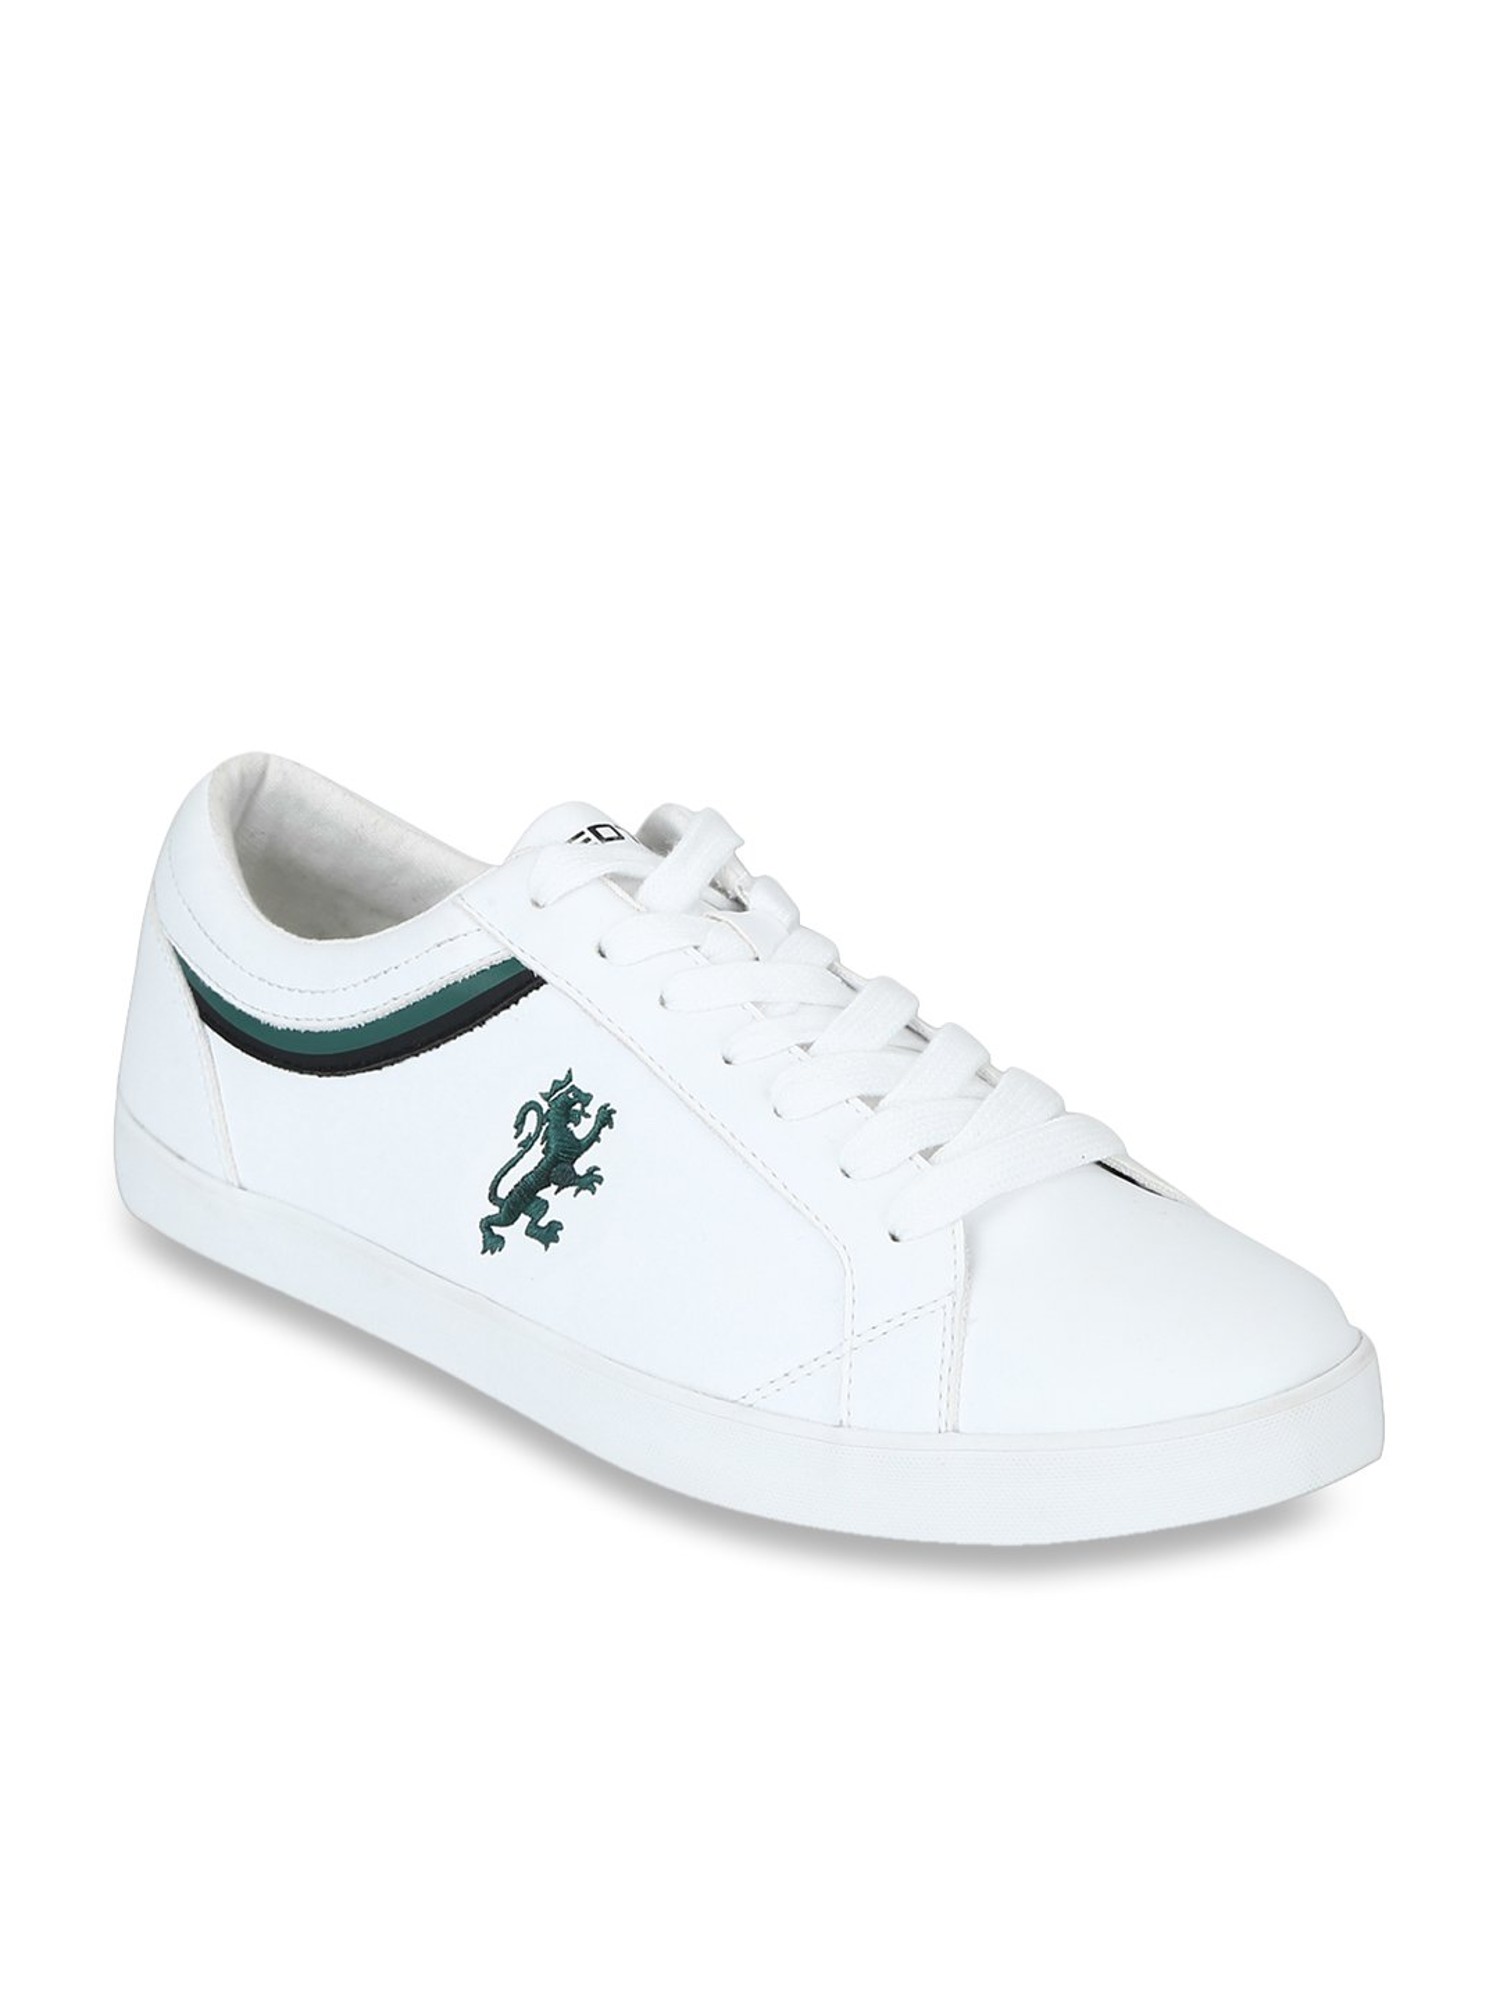 red tape white casual shoes - 55% OFF 